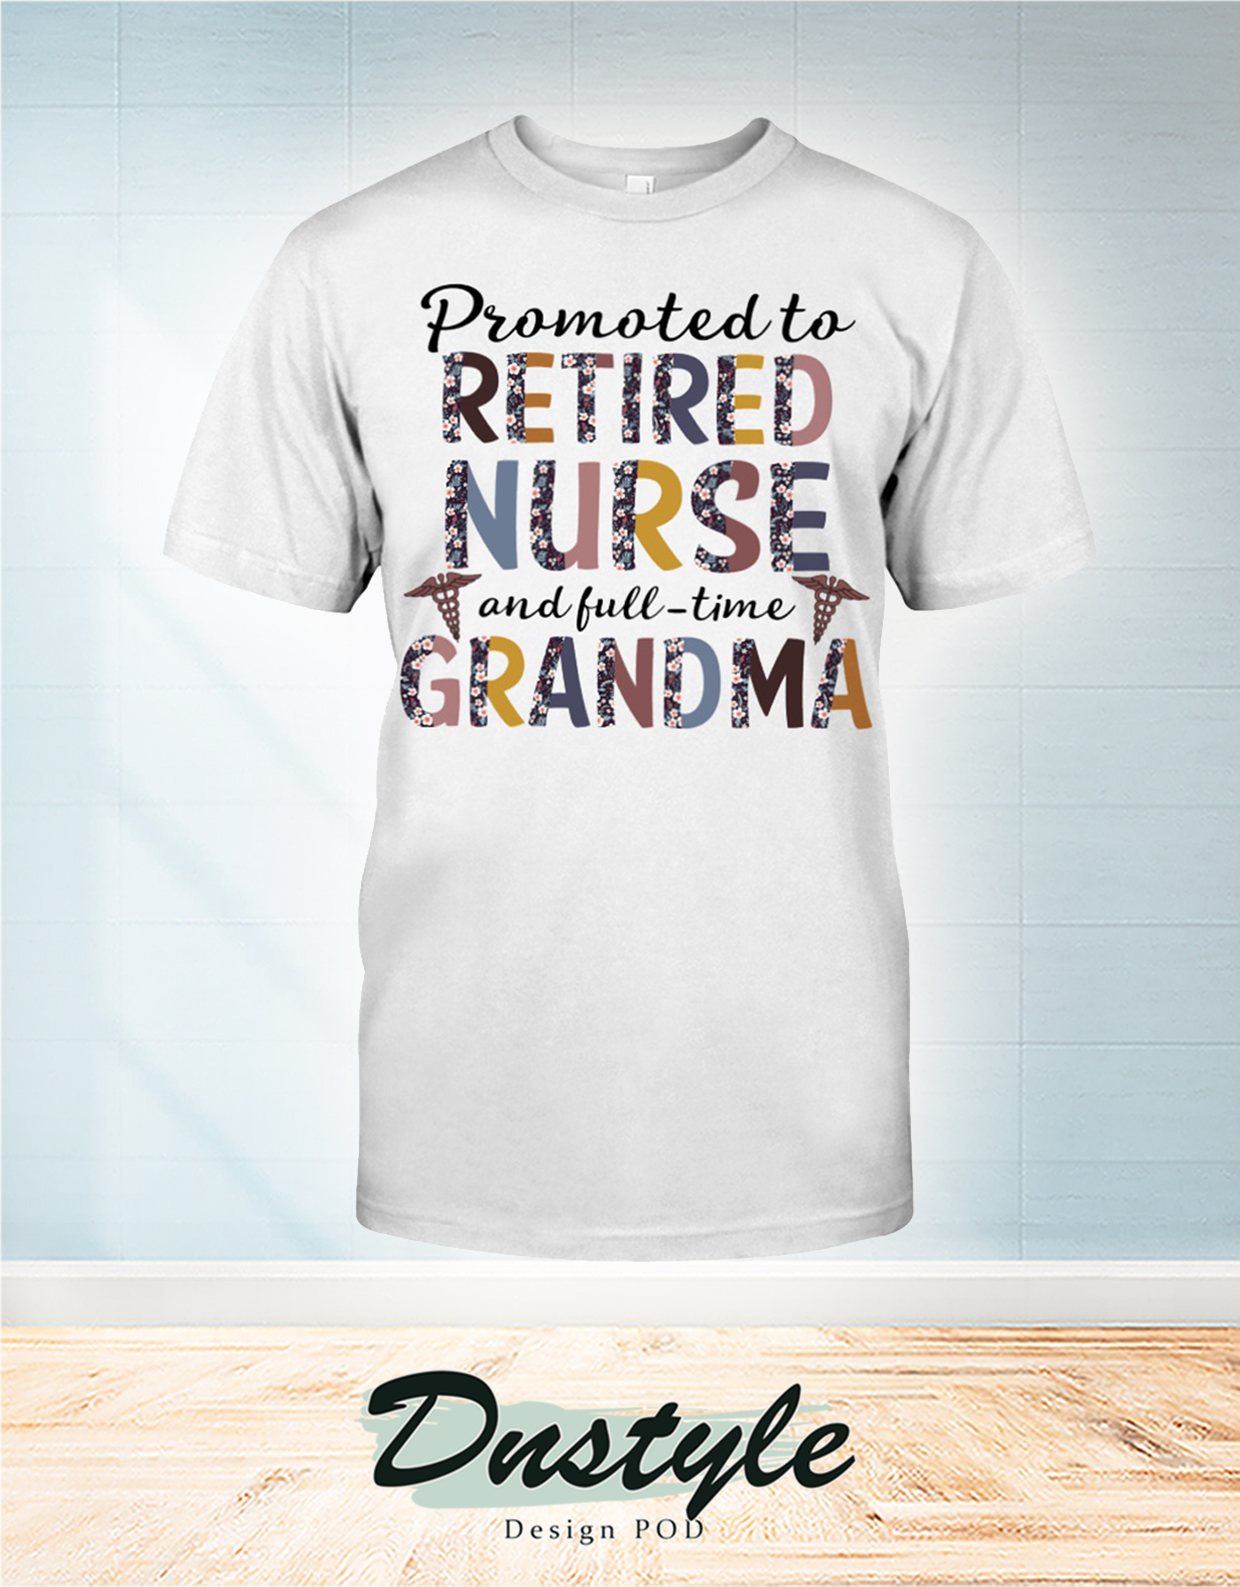 Promoted to retired nurse and full time grandma t-shirt